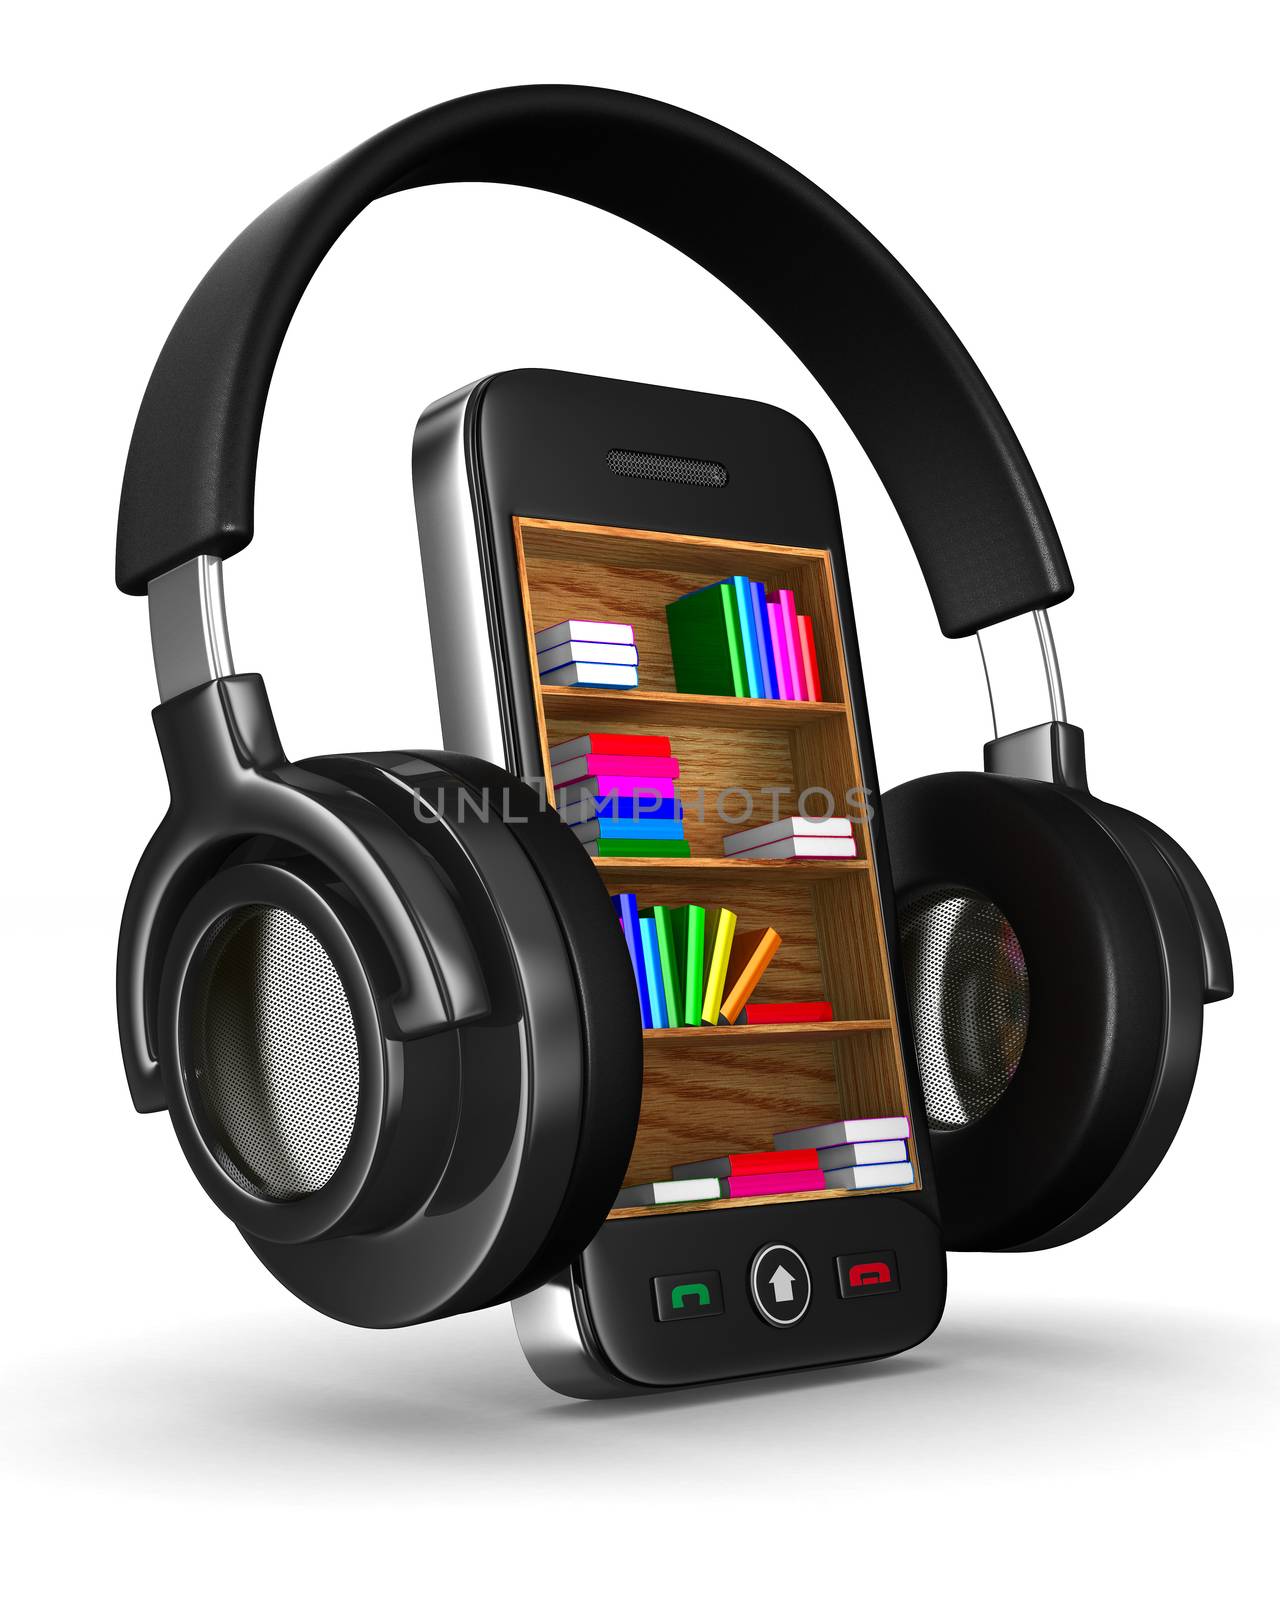 Audio books on white background. Isolated 3D image by ISerg